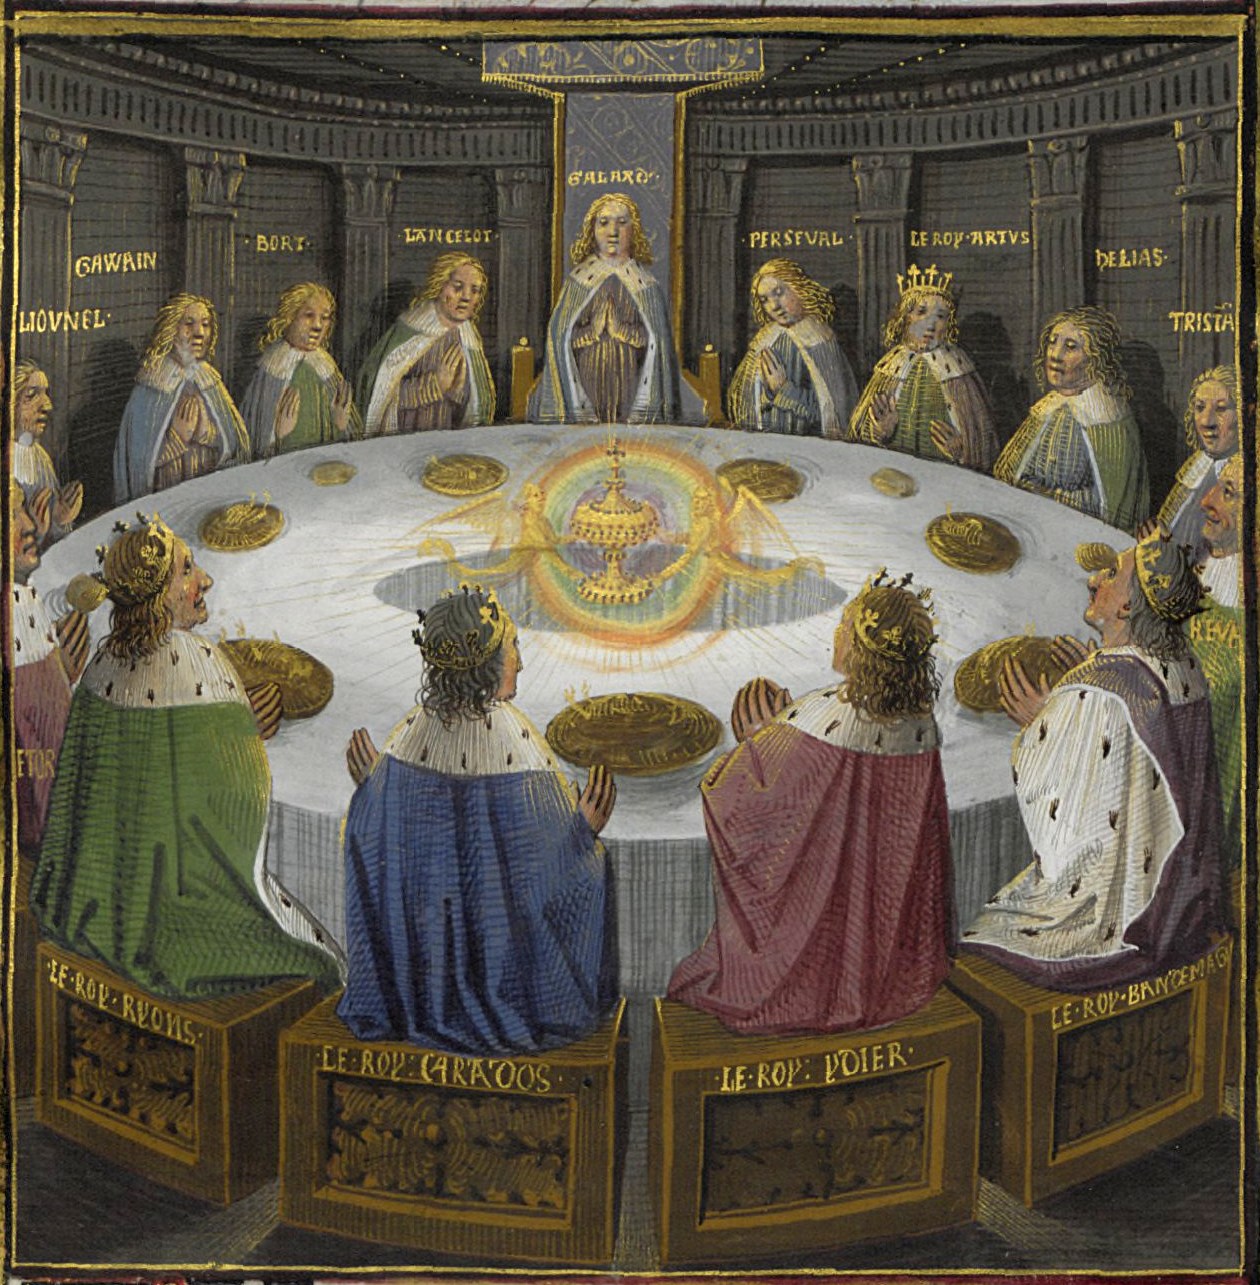 King Arthur's knights, gathered at the Round Table to celebrate the Pentecost.